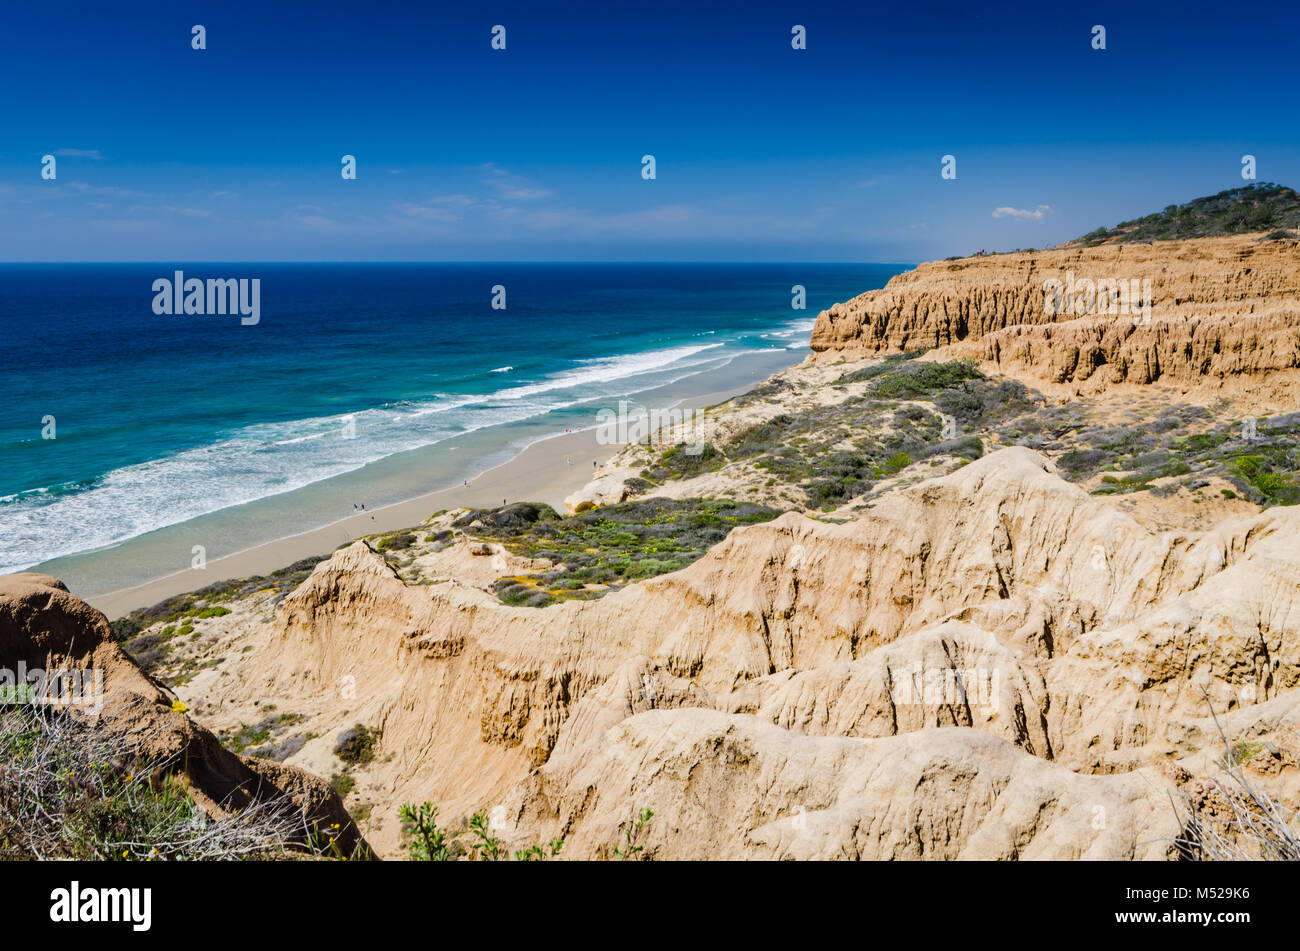 Torrey Pines State Natural Reserve, located within San Diego city limits,  remains one of the wildest stretches of land on our Southern California coa Stock Photo